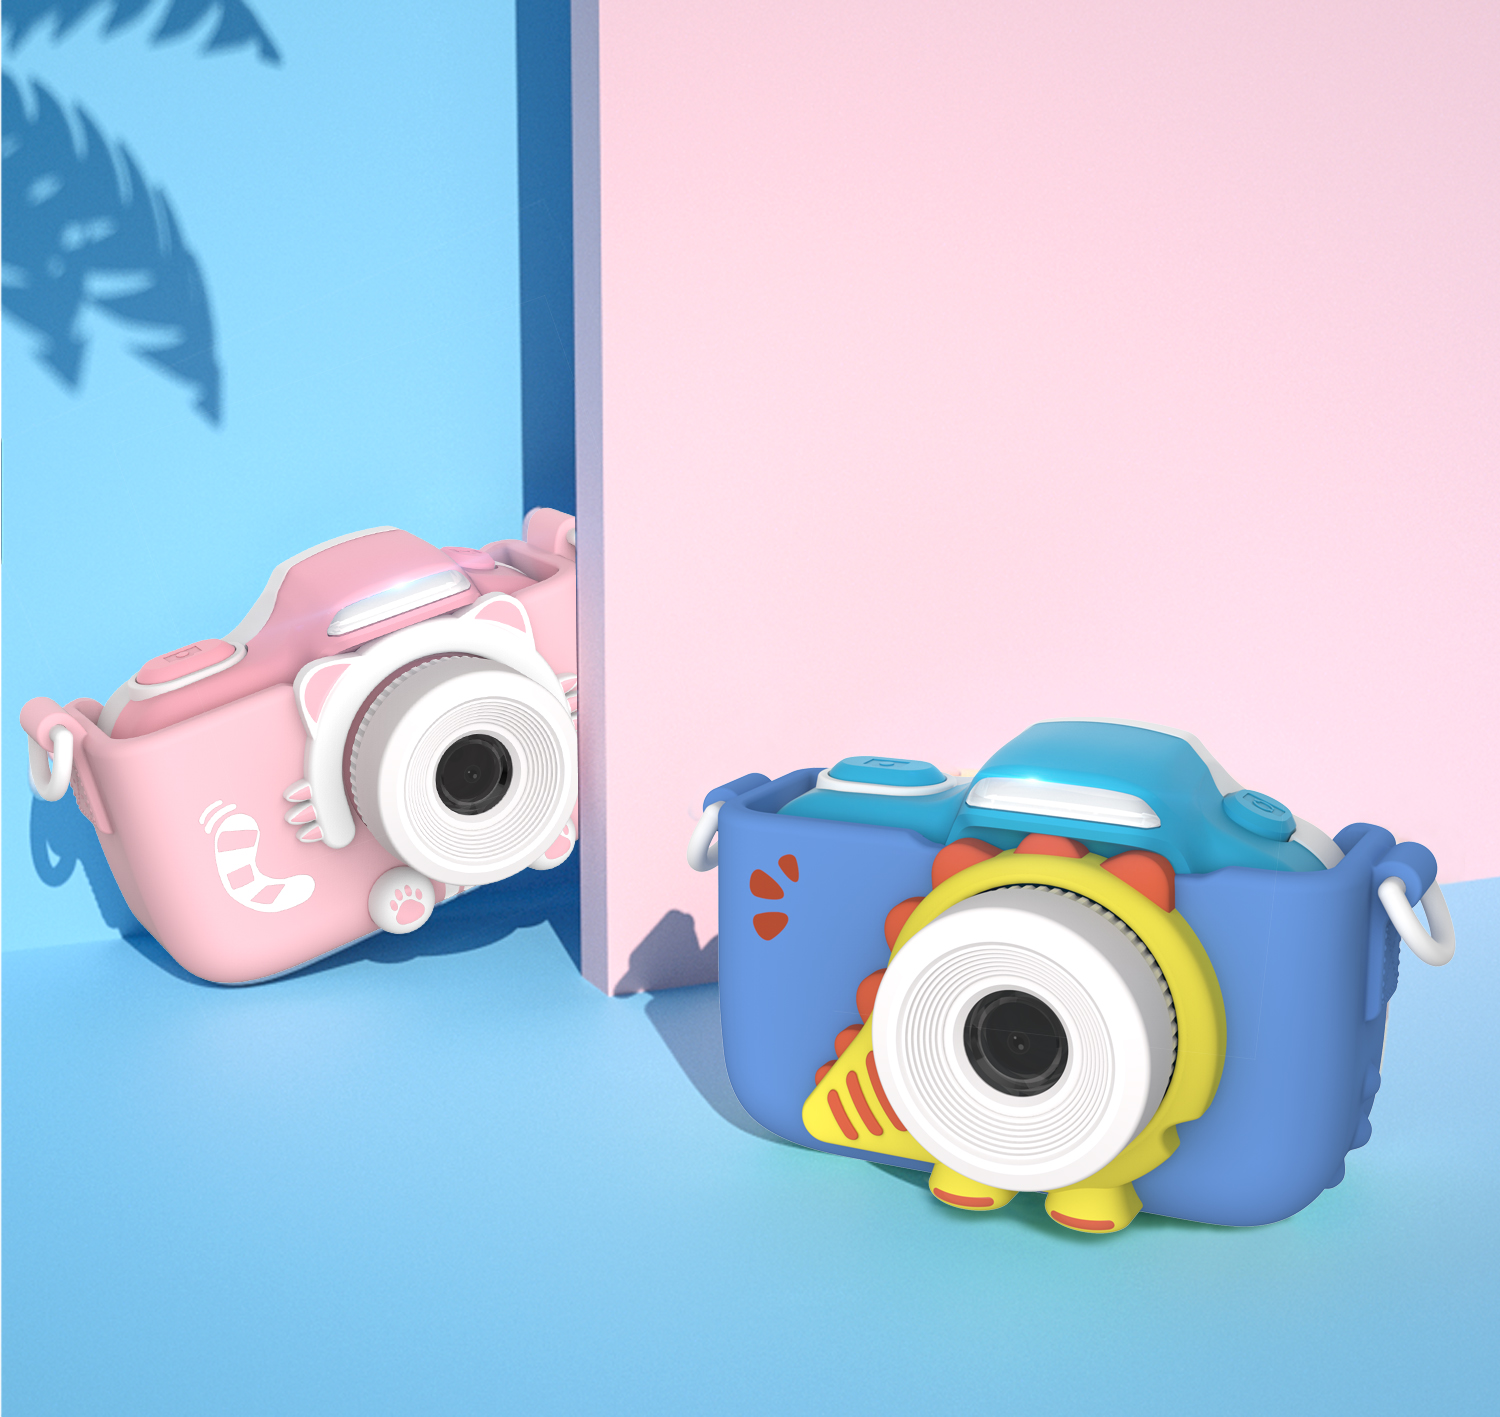 Blue_PInk_Camera_Wall_Background